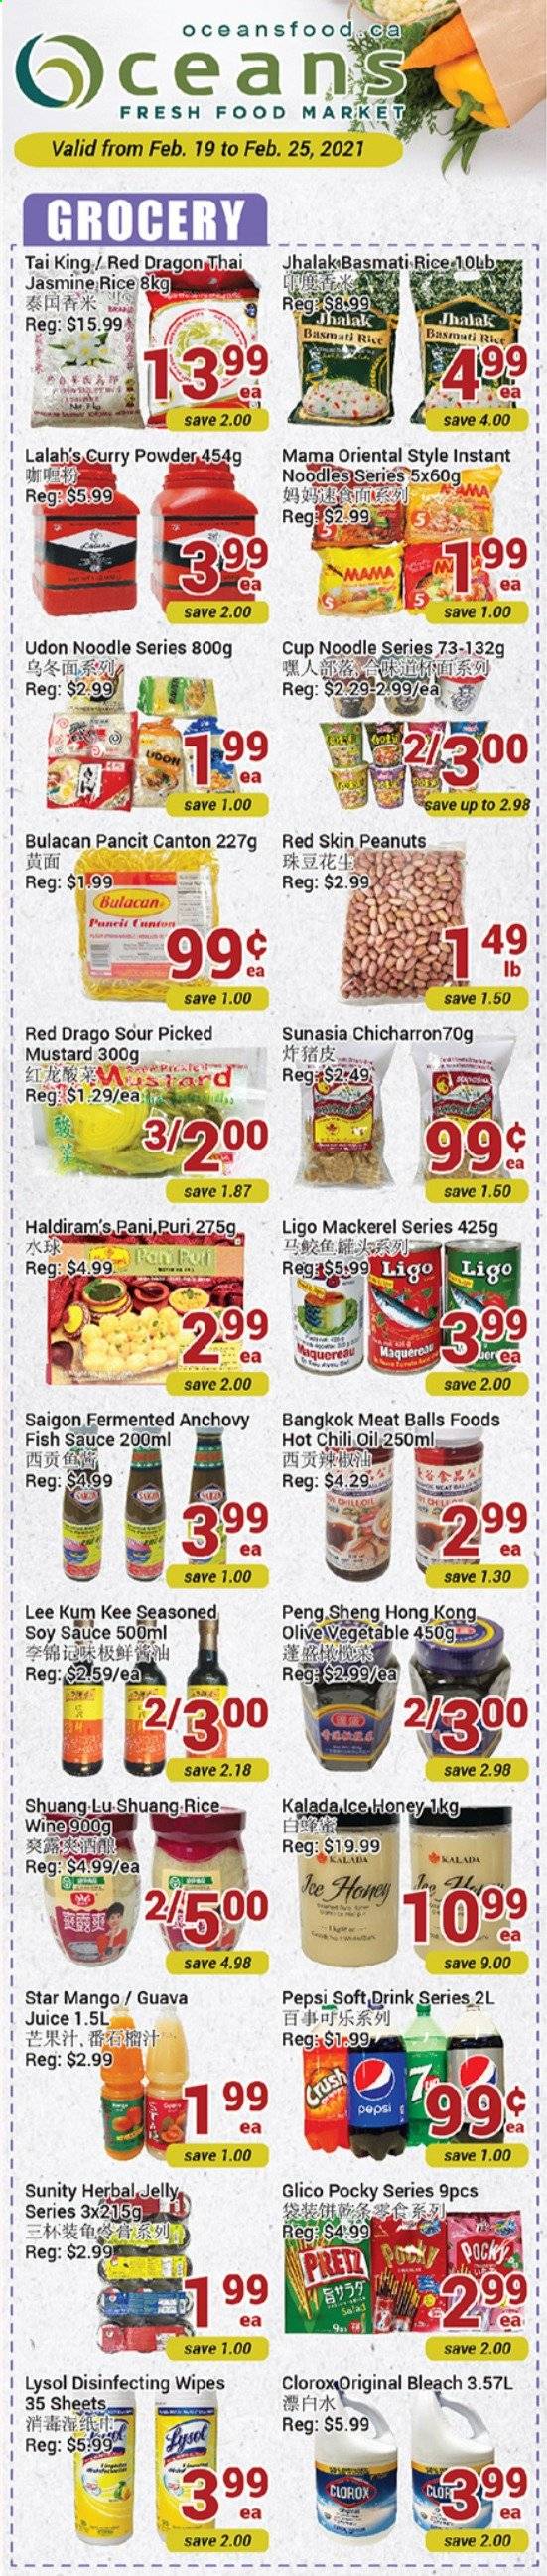 thumbnail - Oceans Flyer - February 19, 2021 - February 25, 2021 - Sales products - guava, mango, mackerel, fish, instant noodles, sauce, noodles, jelly, anchovies, basmati rice, rice, jasmine rice, curry powder, fish sauce, mustard, soy sauce, Lee Kum Kee, oil, honey, peanuts, Pepsi, juice, soft drink, wipes, bleach, Lysol, Clorox. Page 1.